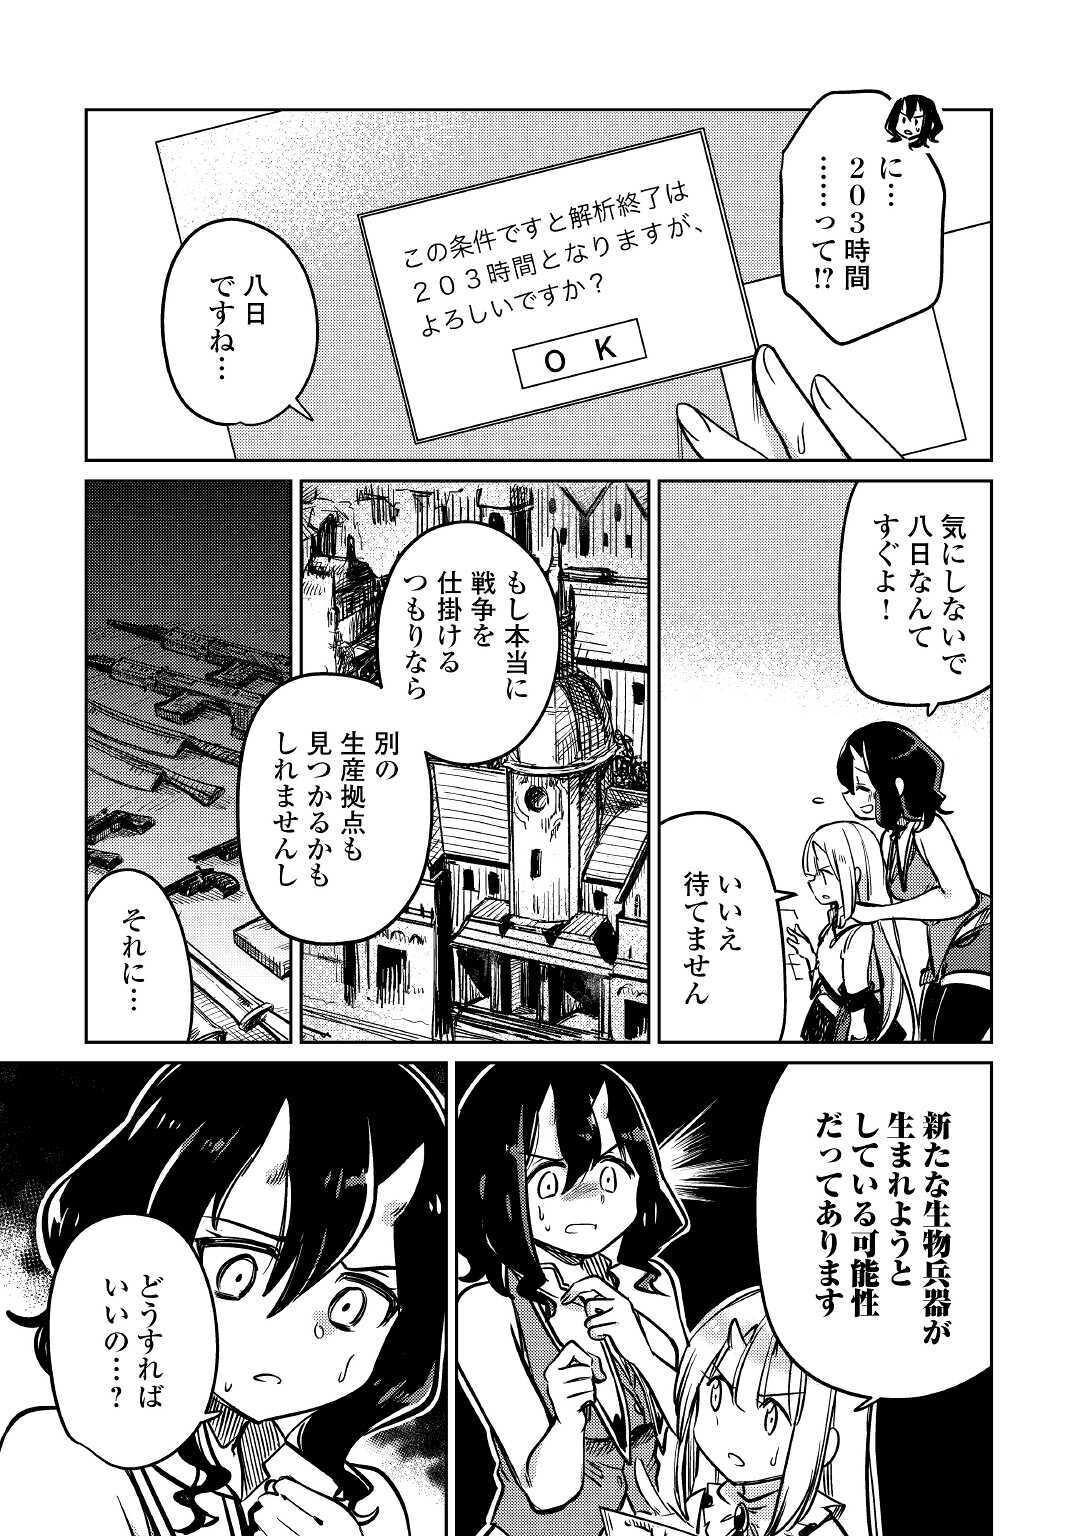 The Former Structural Researcher’s Story of Otherworldly Adventure 第27話 - Page 23